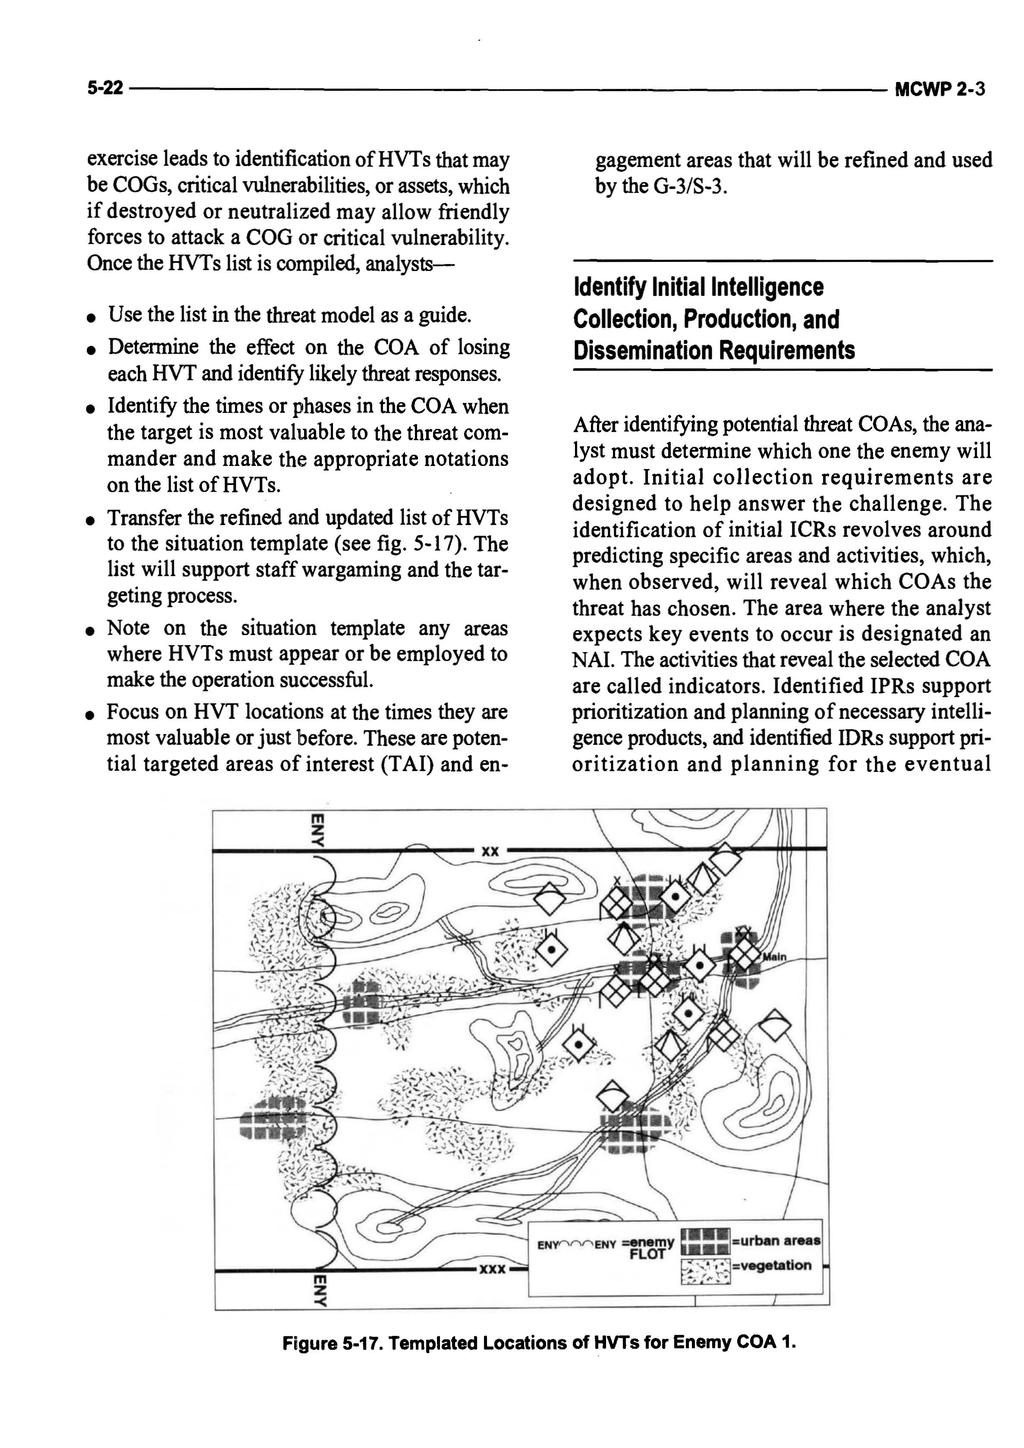 5-22---------------------------- MCWP 2-3 exercise leads to identification ofhvts that may be COGs, critical vulnerabilities, or assets, which if destroyed or neutralized may allow friendly forces to